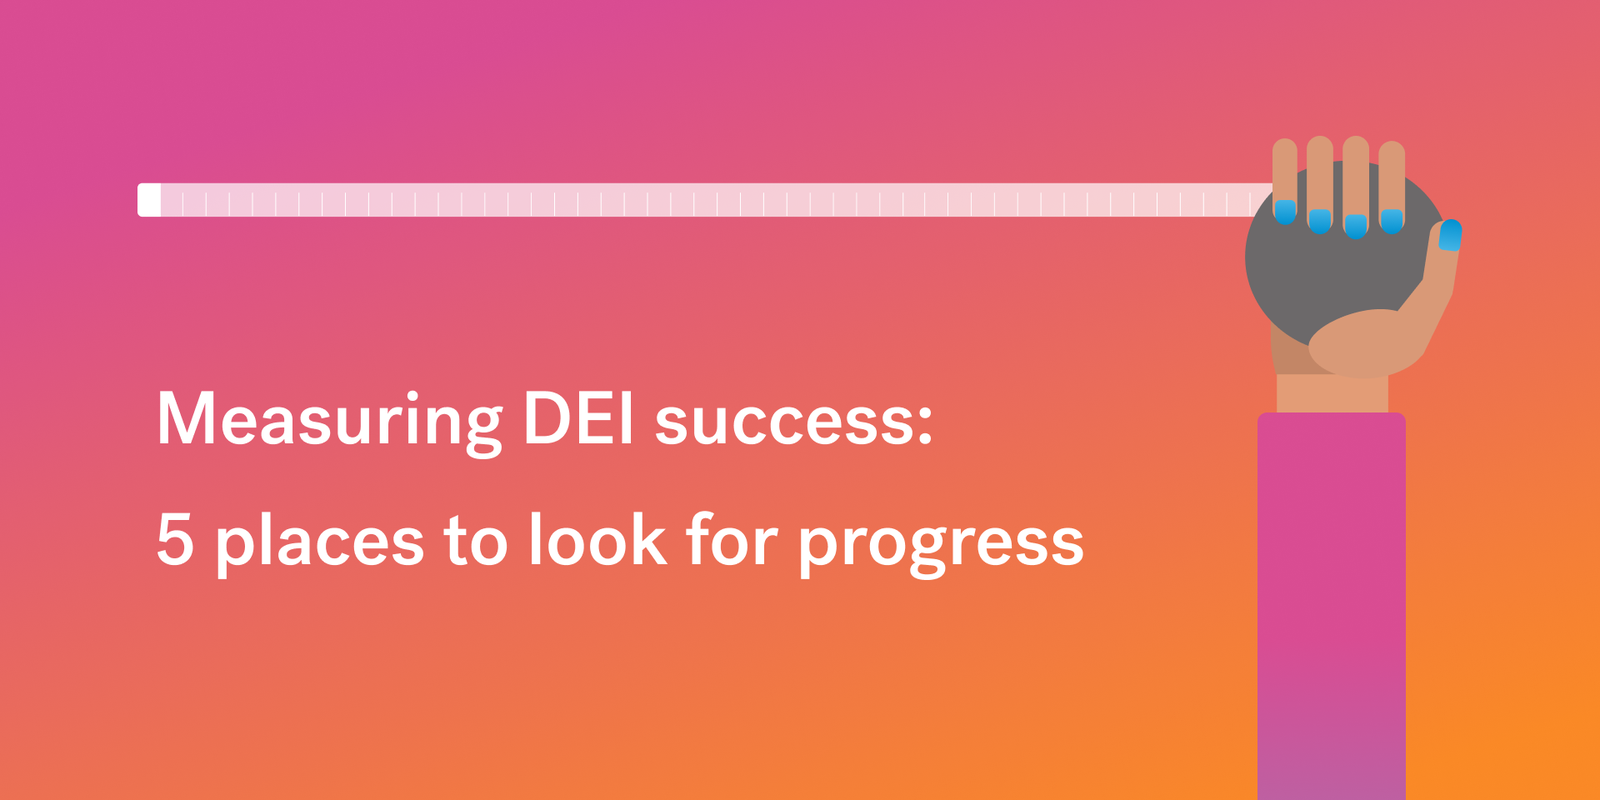 Measuring DEI success: 5 places to look for progress